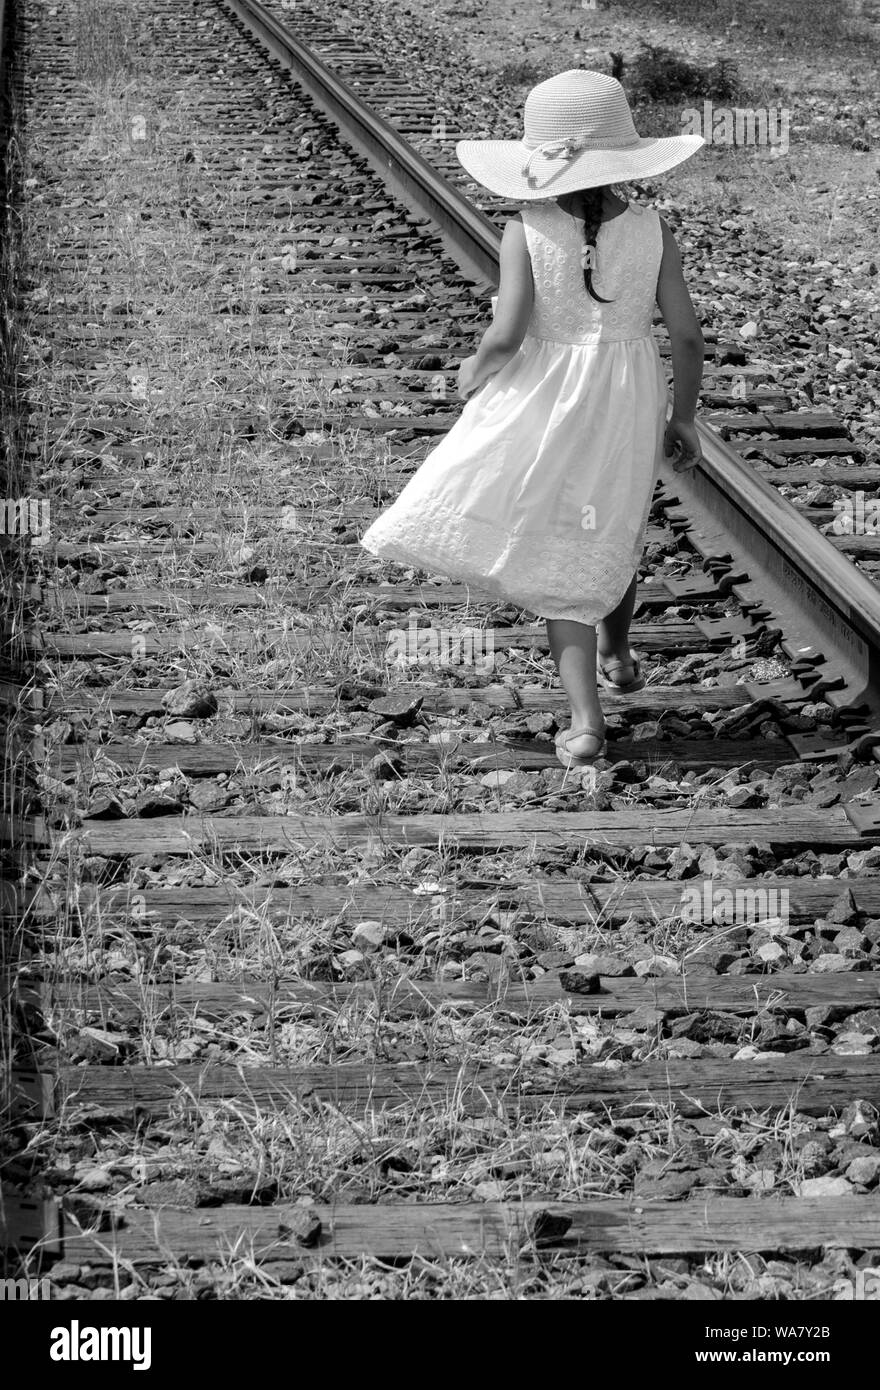 black and white of a little girl in a floppy hat and white sundress walking along a rail road track Stock Photo